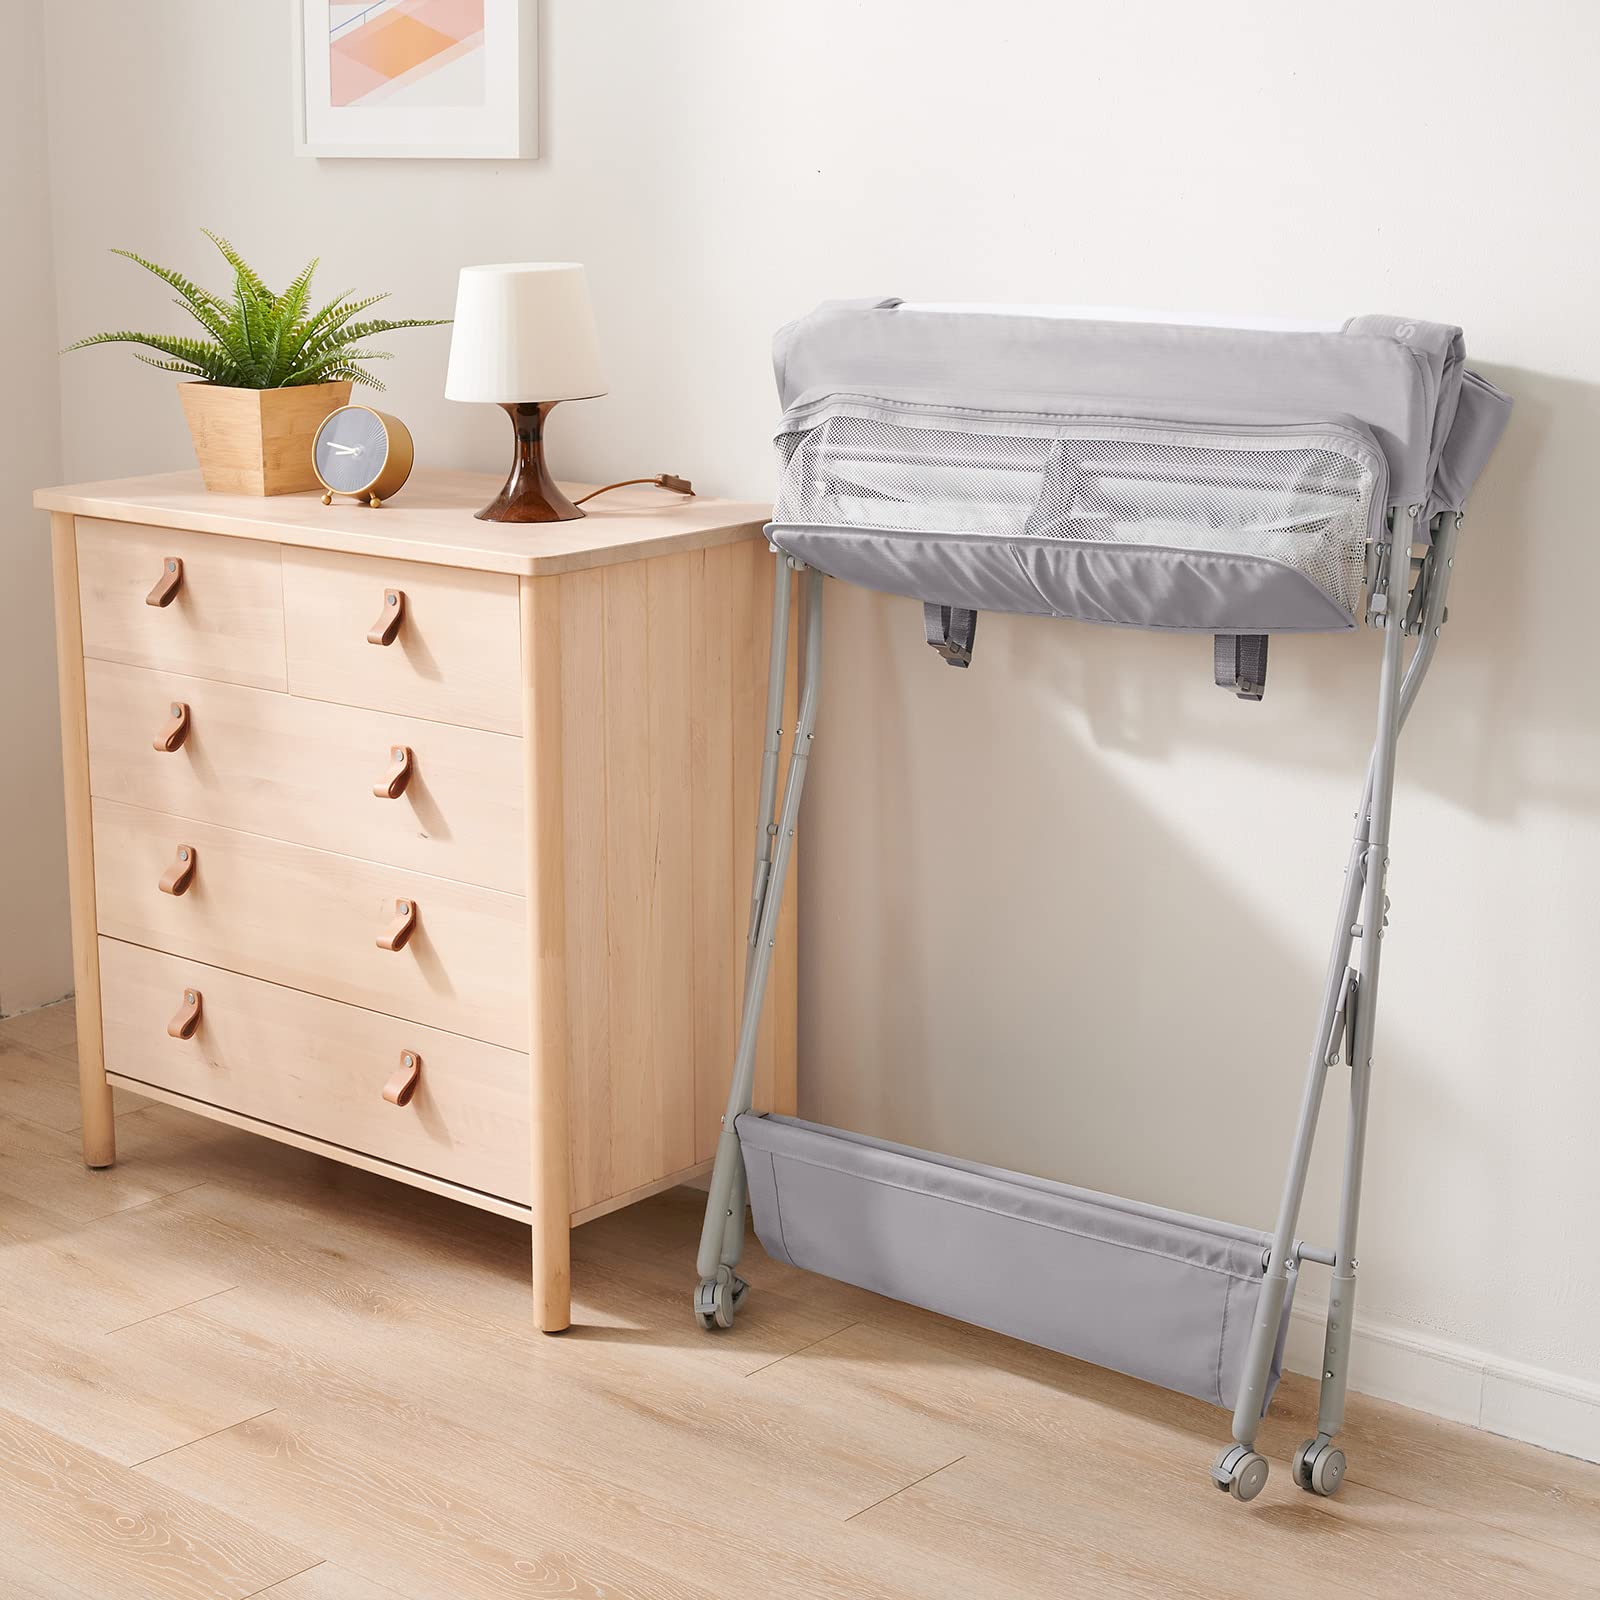 Sweeby Infant Changing Table with Changing Pad, Changing Table Portable Pad Nursery Furniture Baby Changing Station, Gray